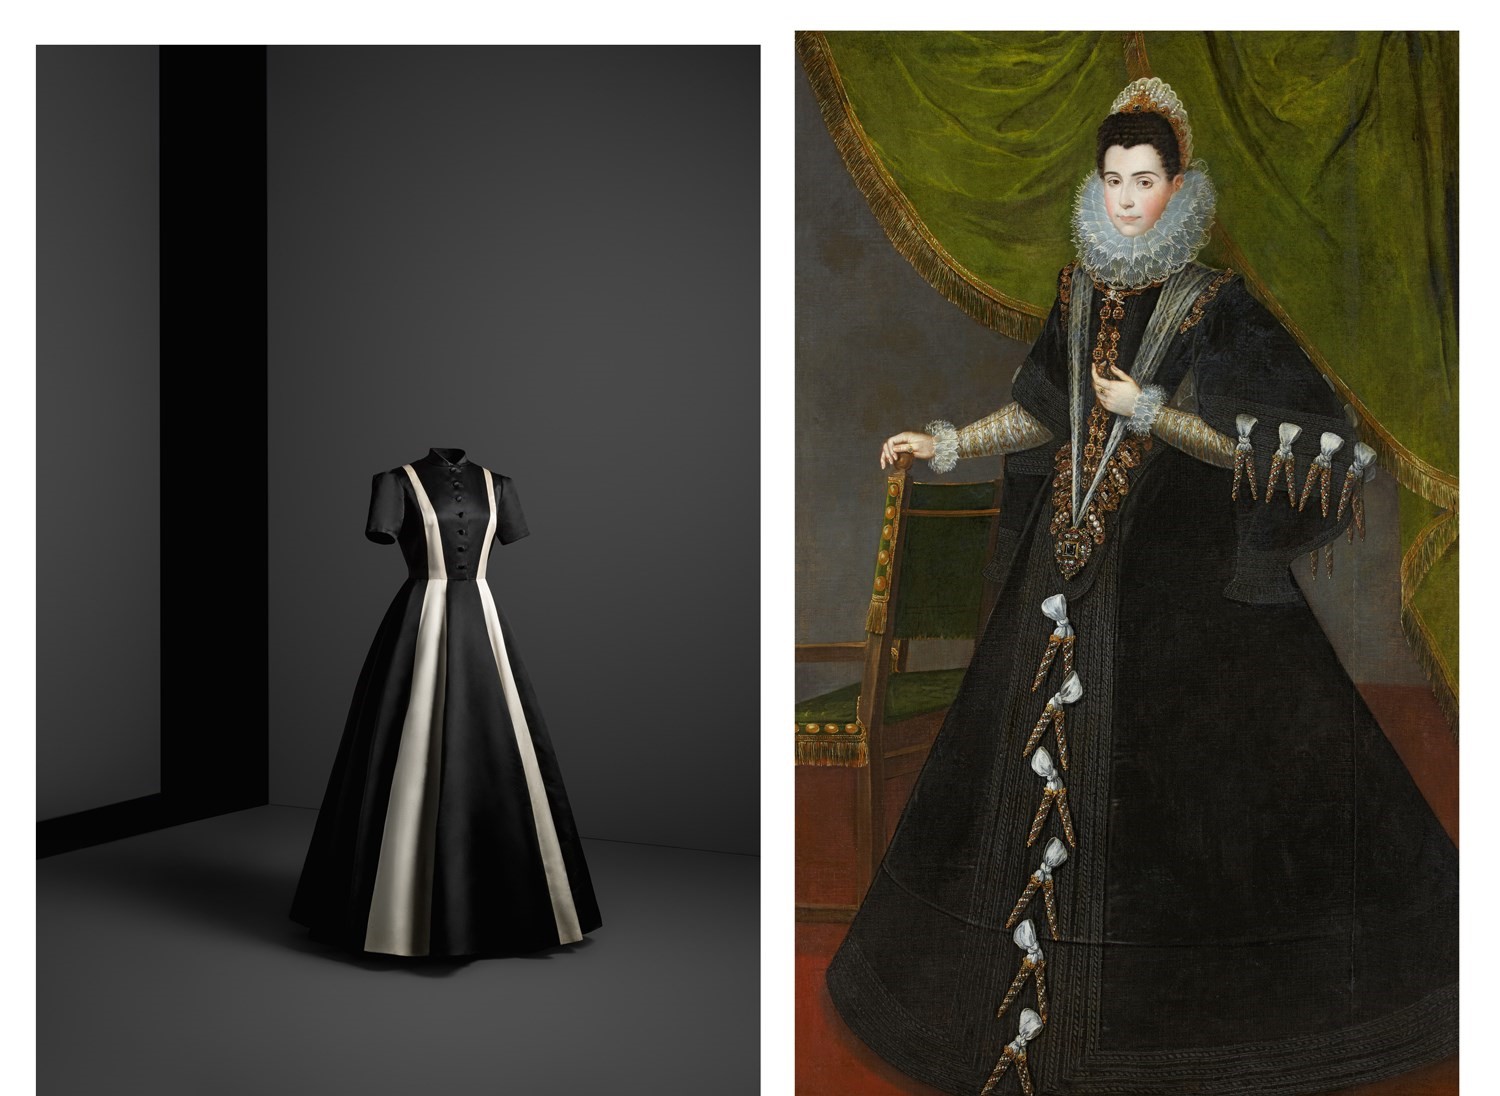 Balenciaga's Fashion Designs Were Inspired by Velázquez and Goya